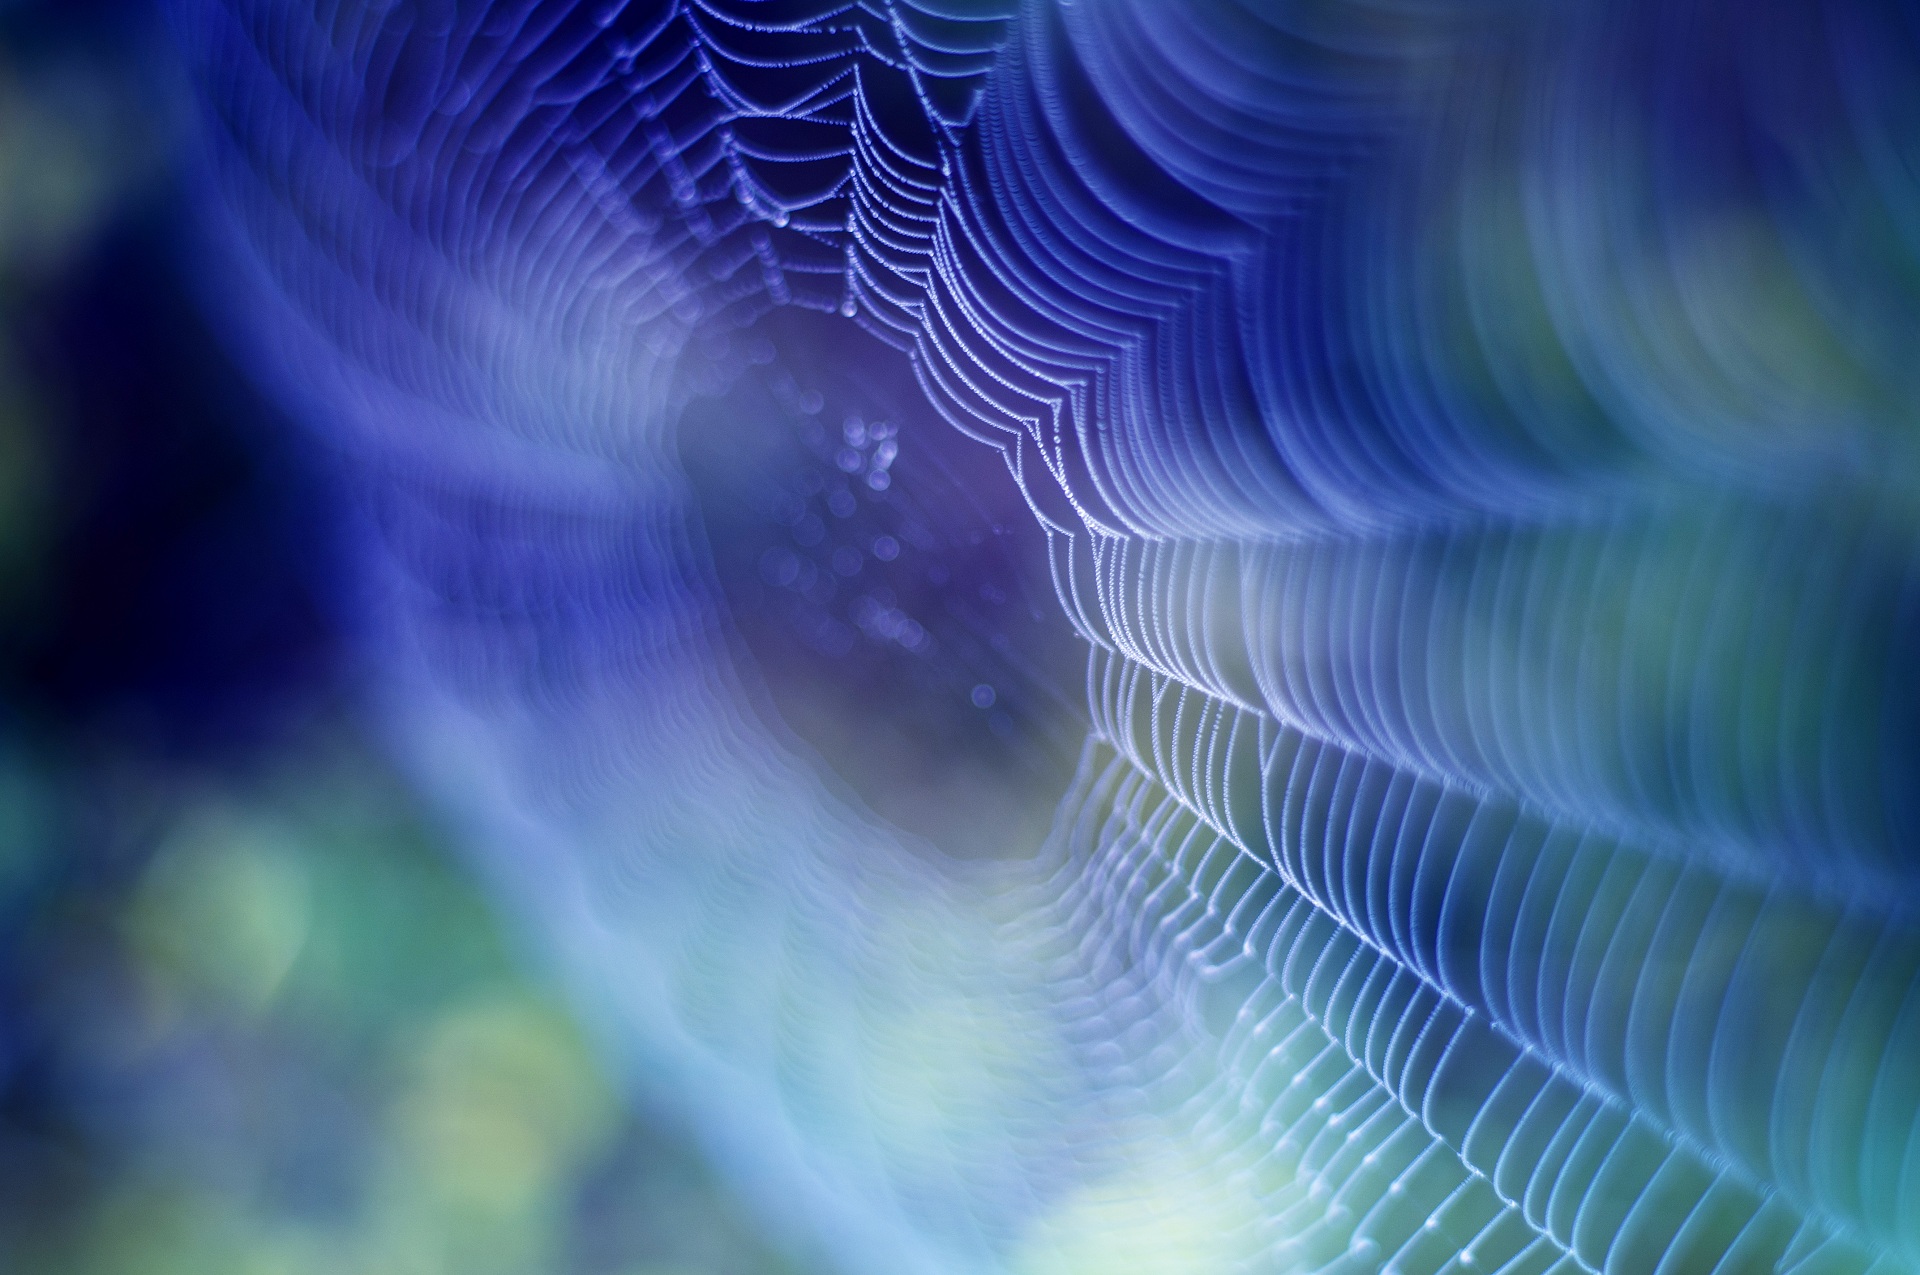 Spider Web Macro Photography Wallpaper Background